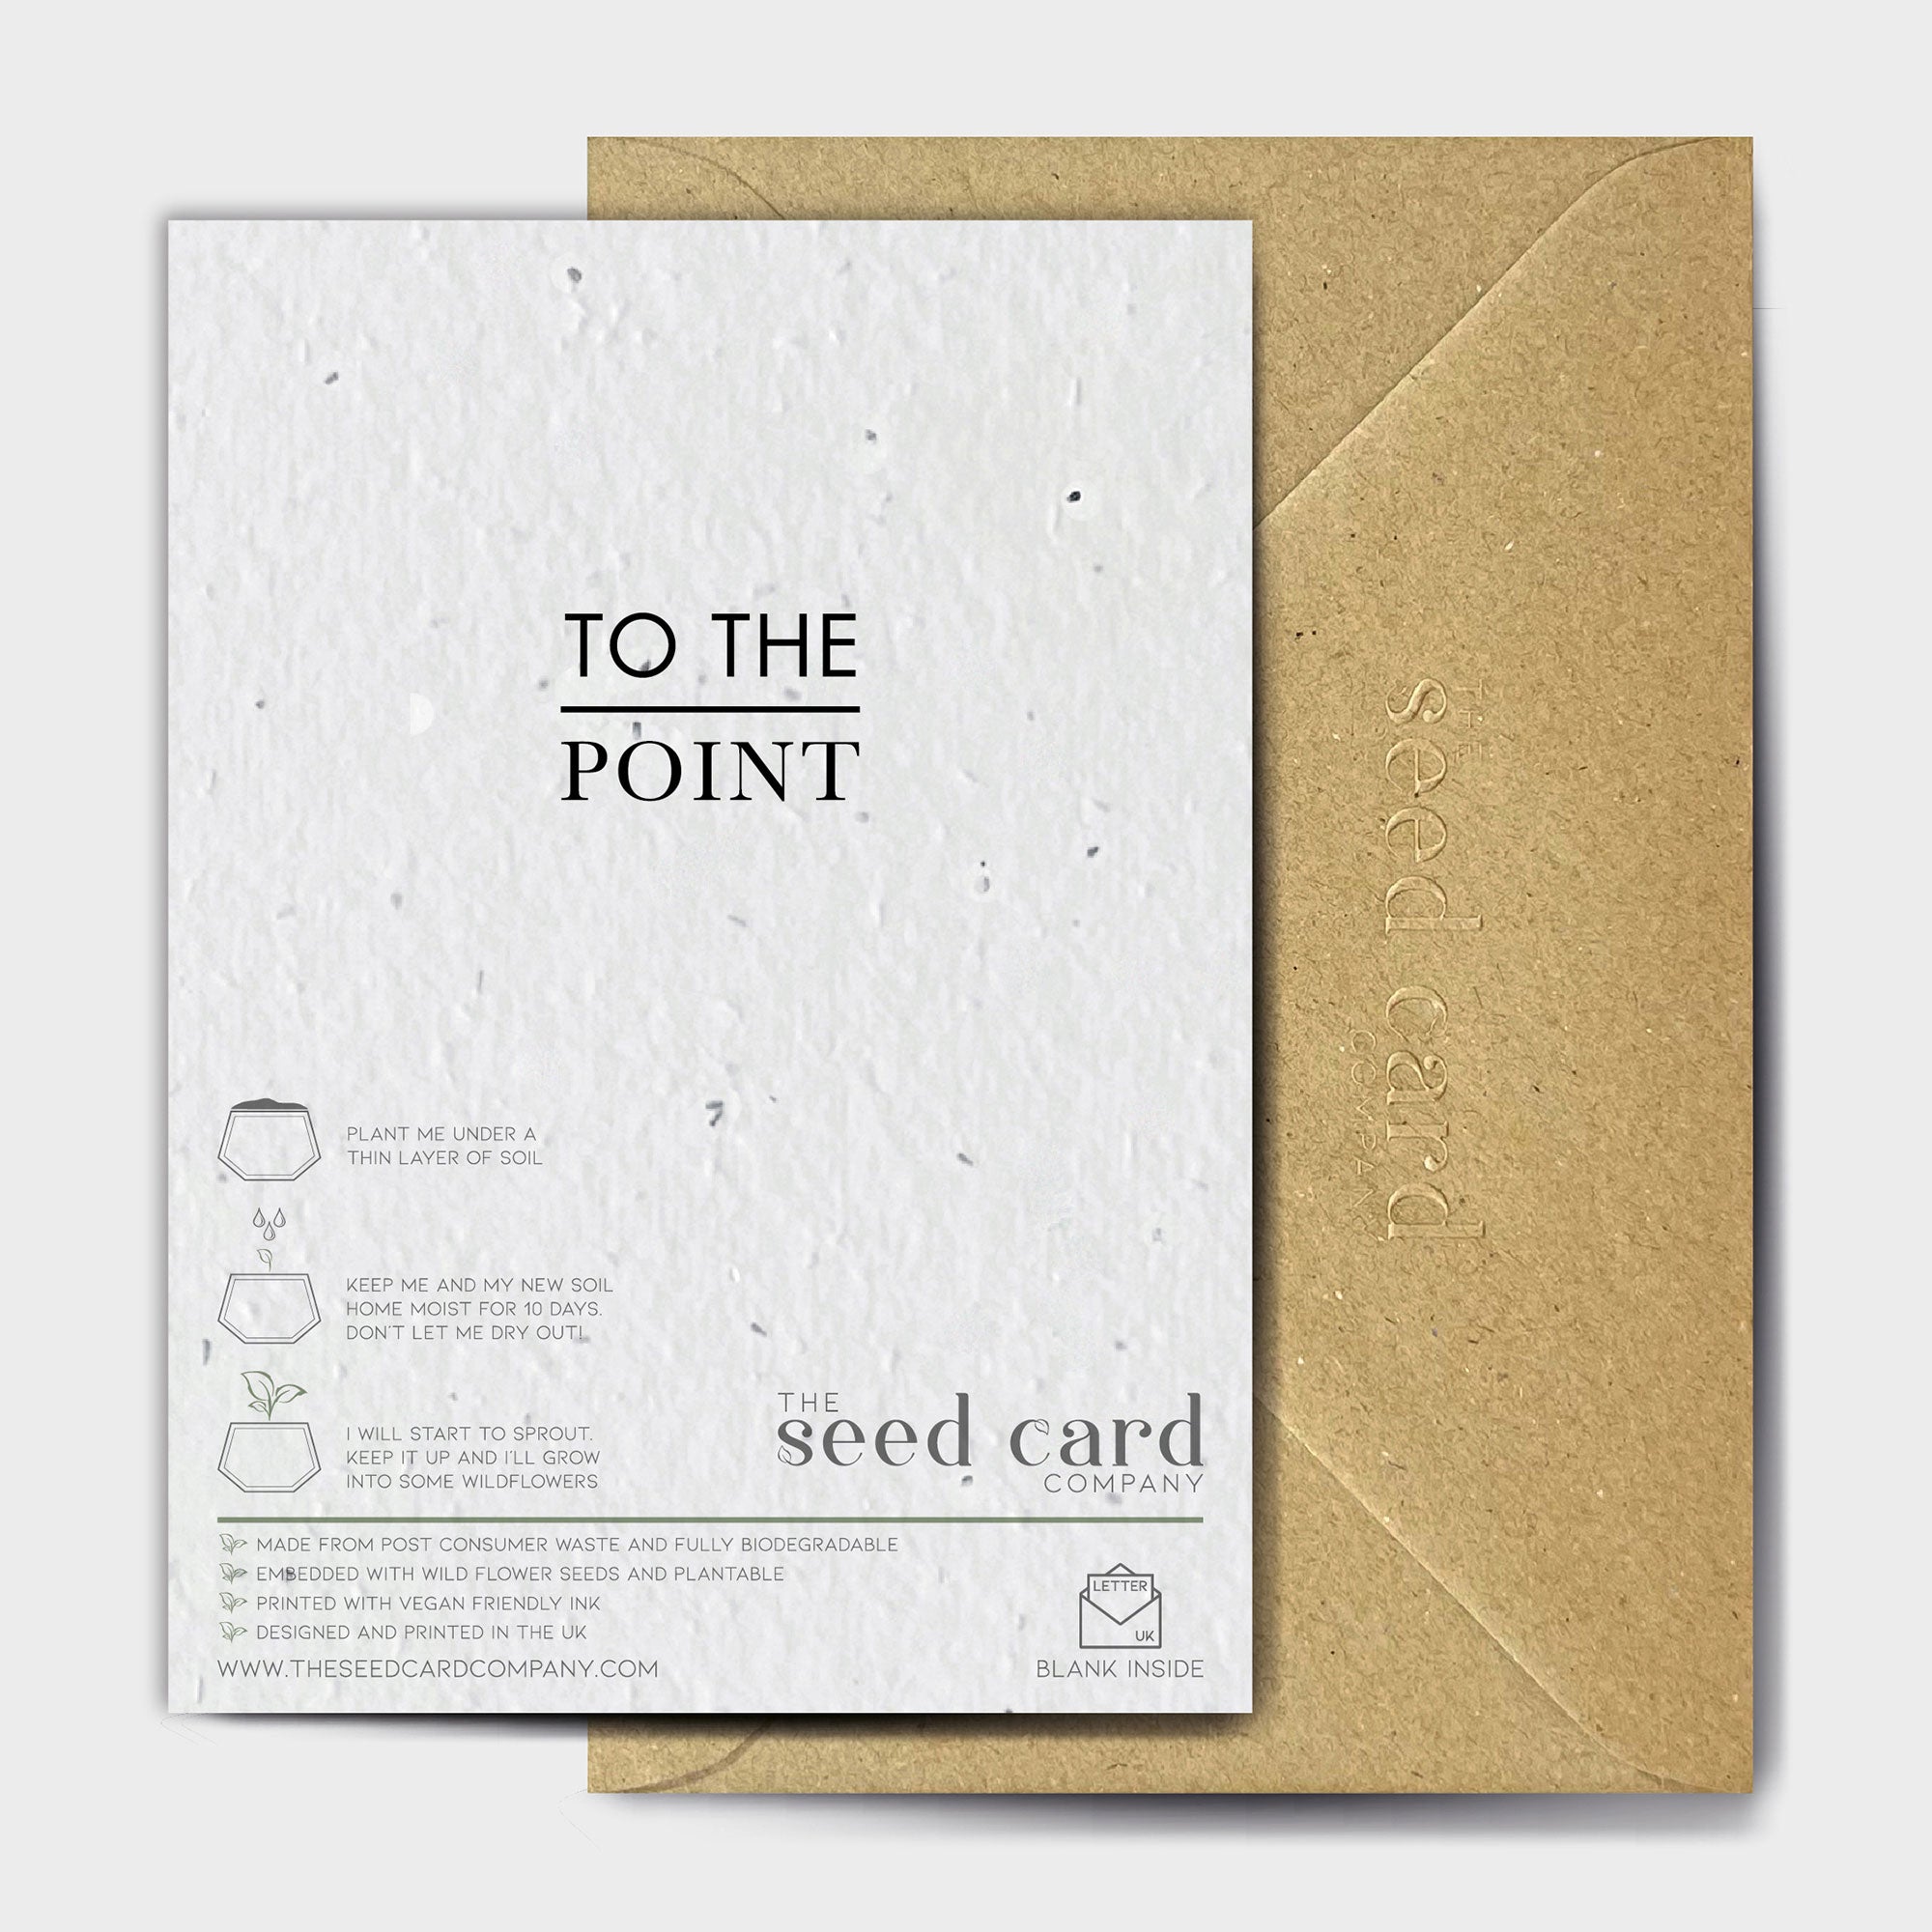 Shop online No One Really Likes The Other Kind - 100% biodegradable seed-embedded cards Shop -The Seed Card Company